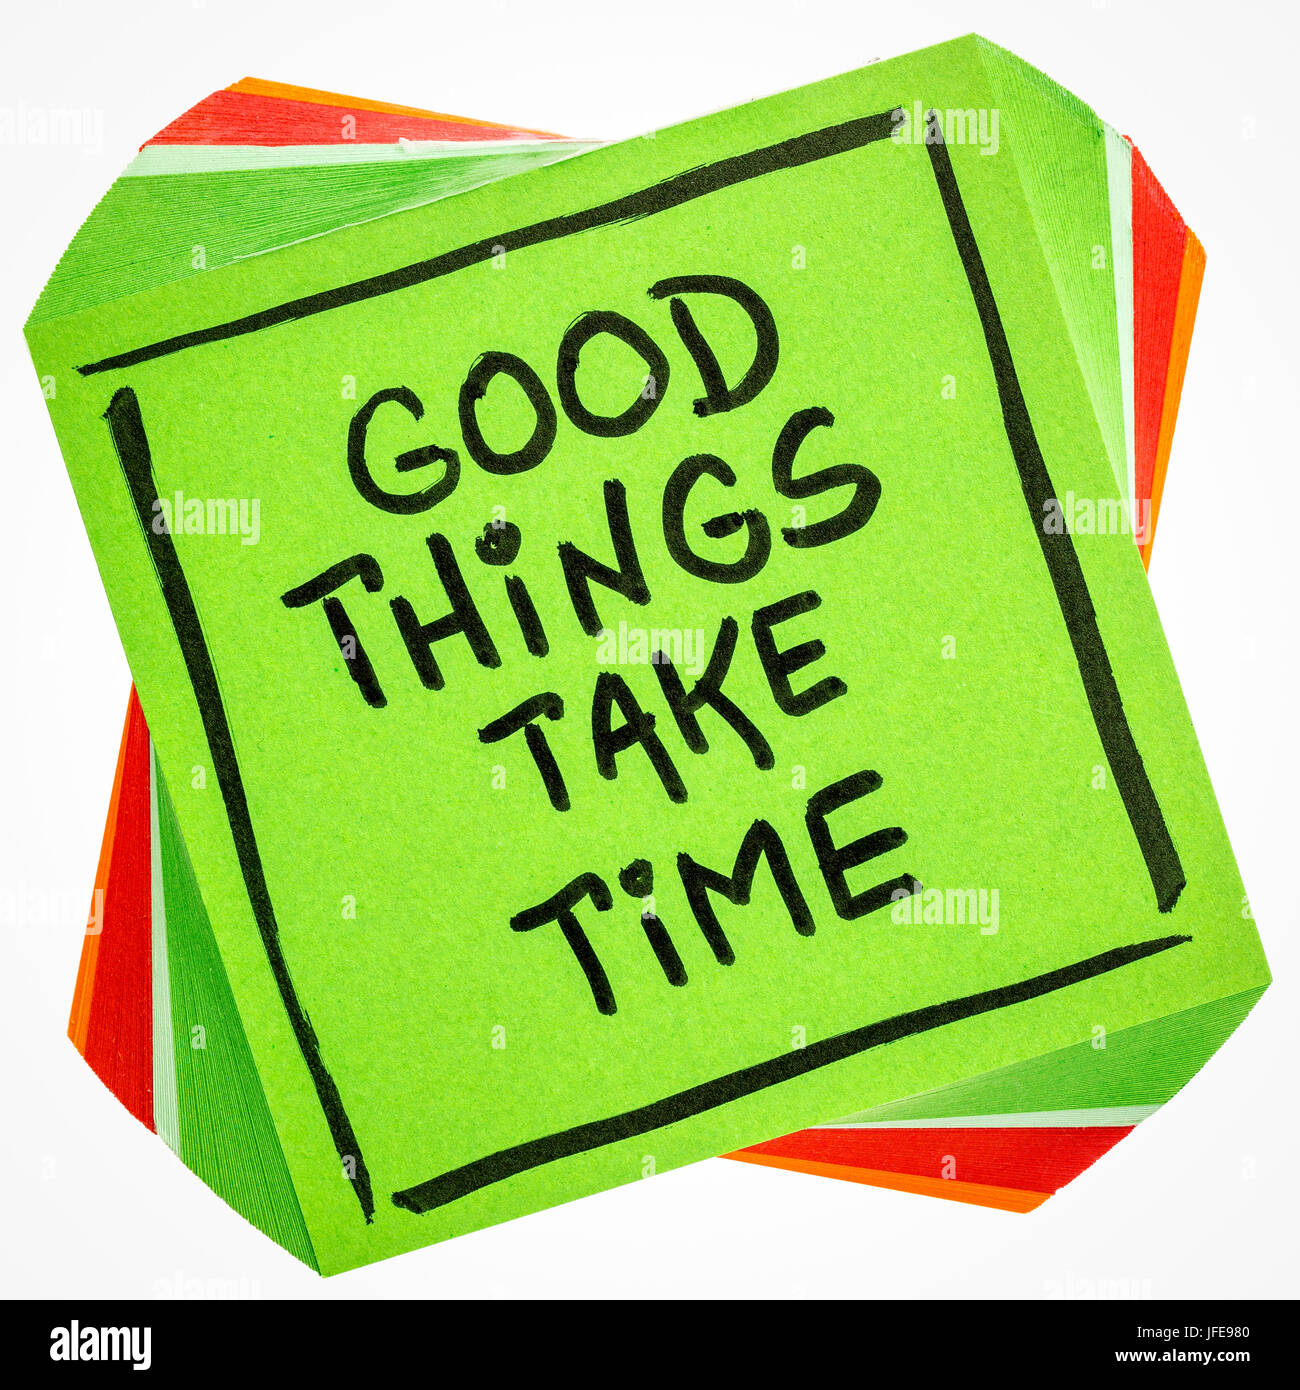 Good things take time quote  - handwriting on an isolated reminder note Stock Photo